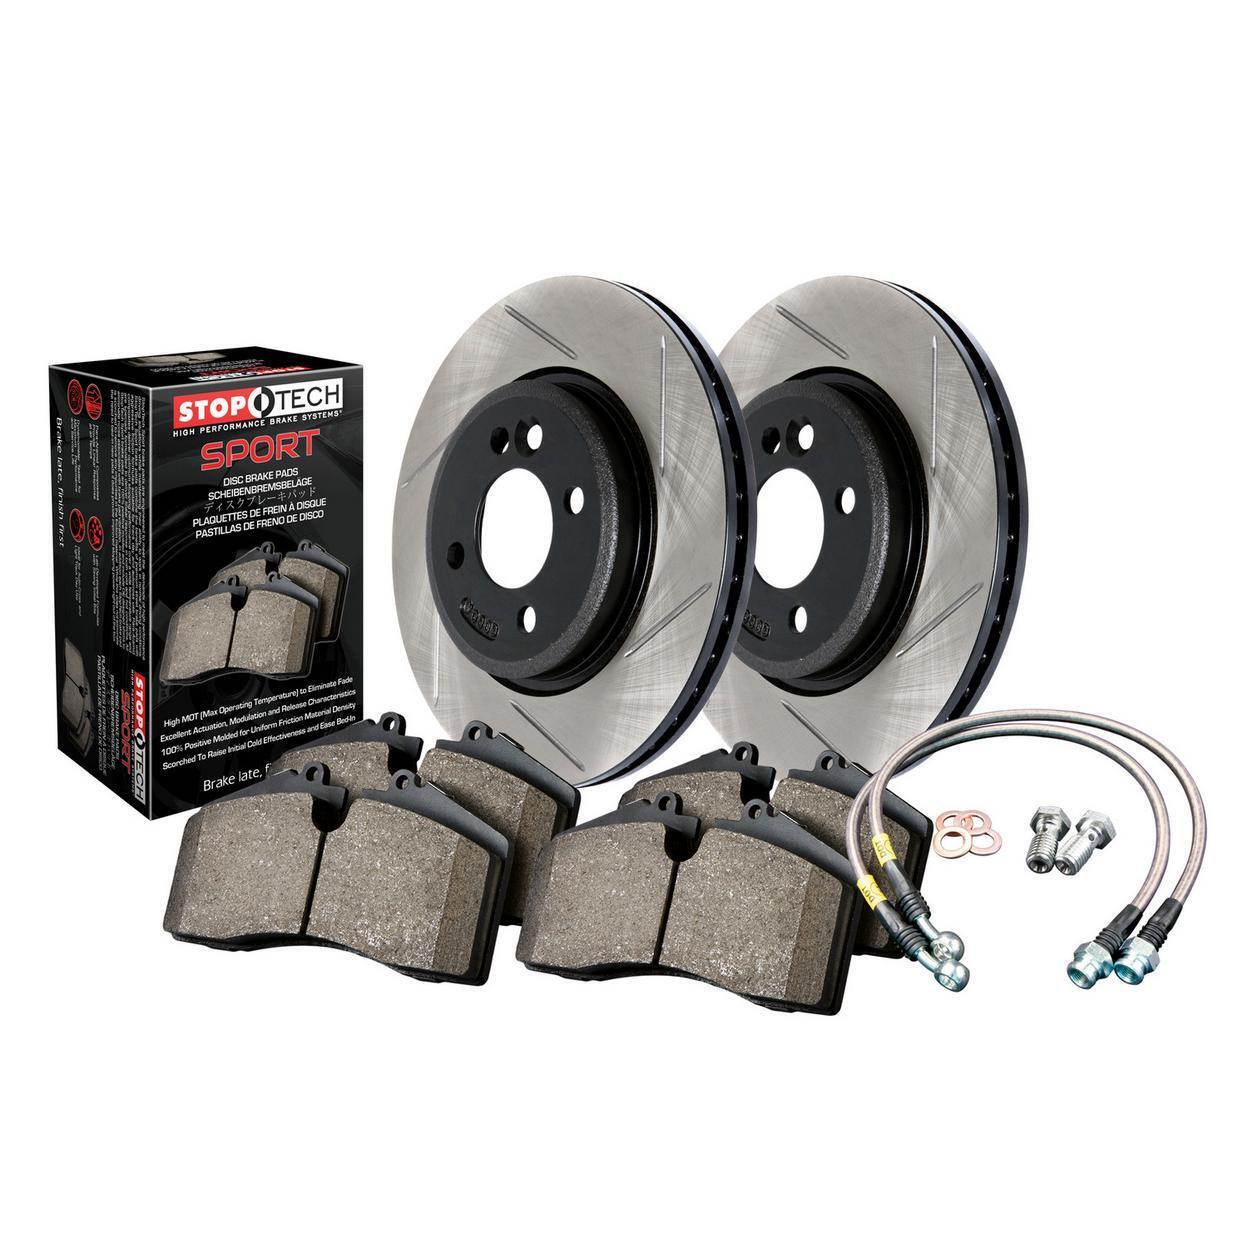 StopTech Sport Axle Pack; Slotted Rotor; Front Brake Kit with Brake lines 977.40